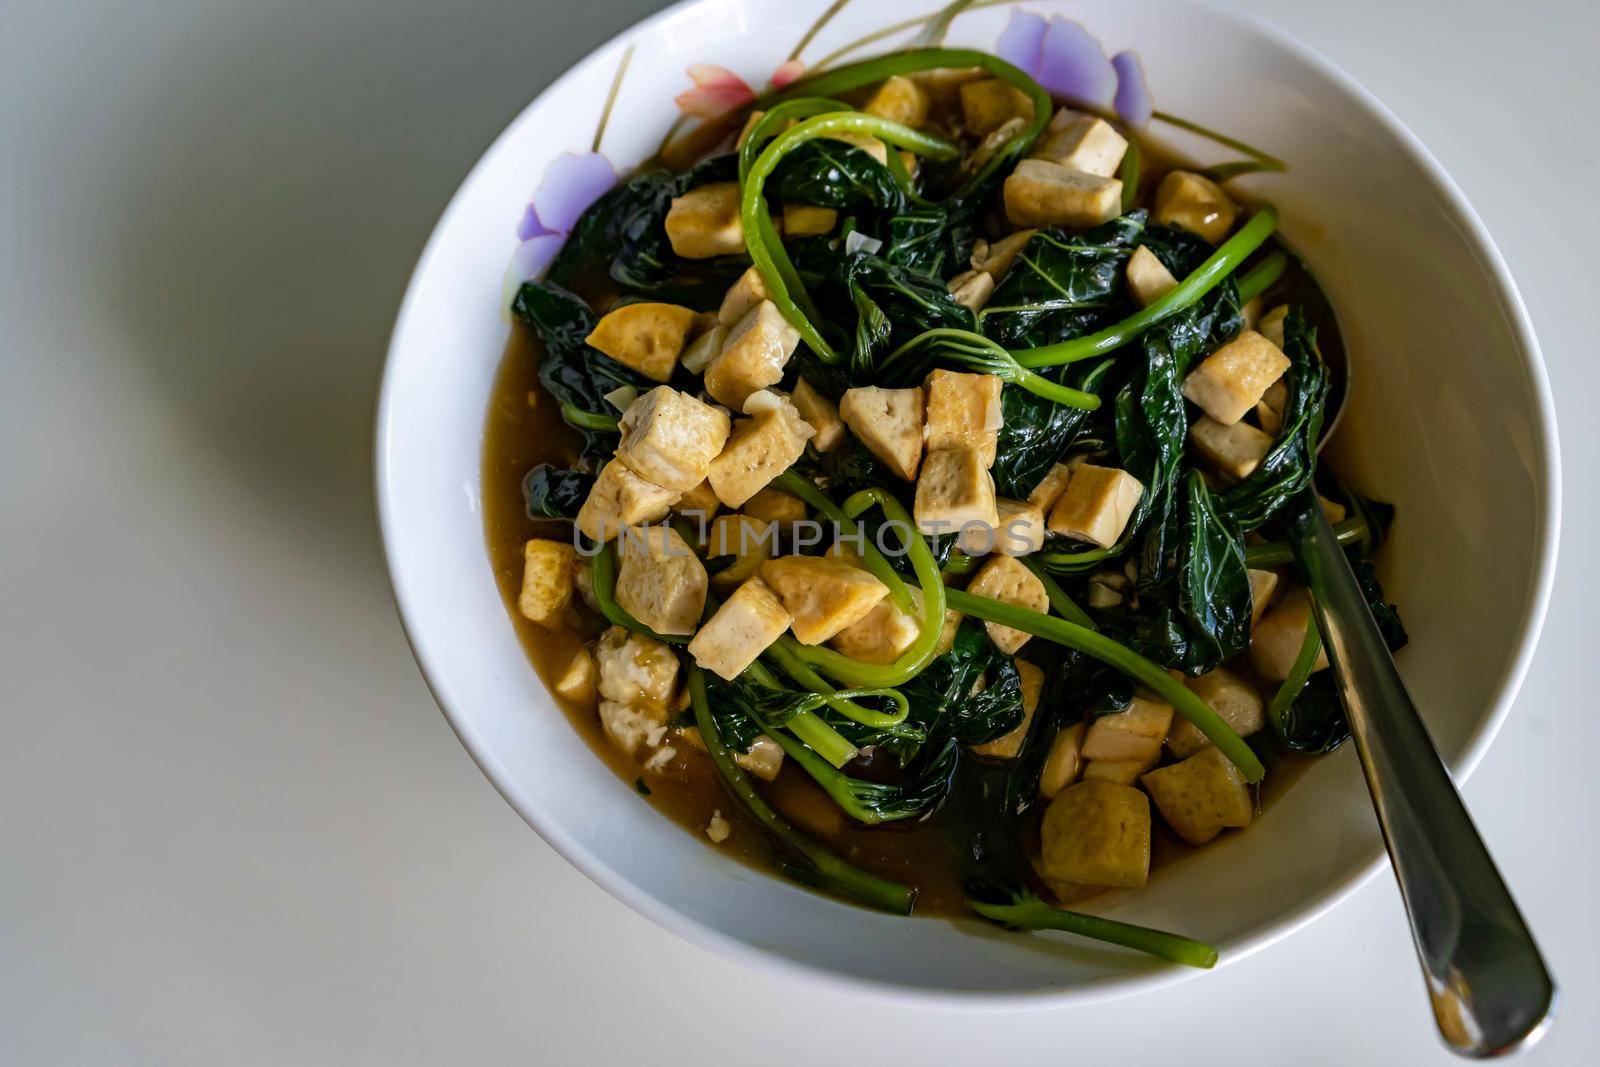 Healthy dish tofu soup with vegetable. Food good for the health and good source for protein and amino acids